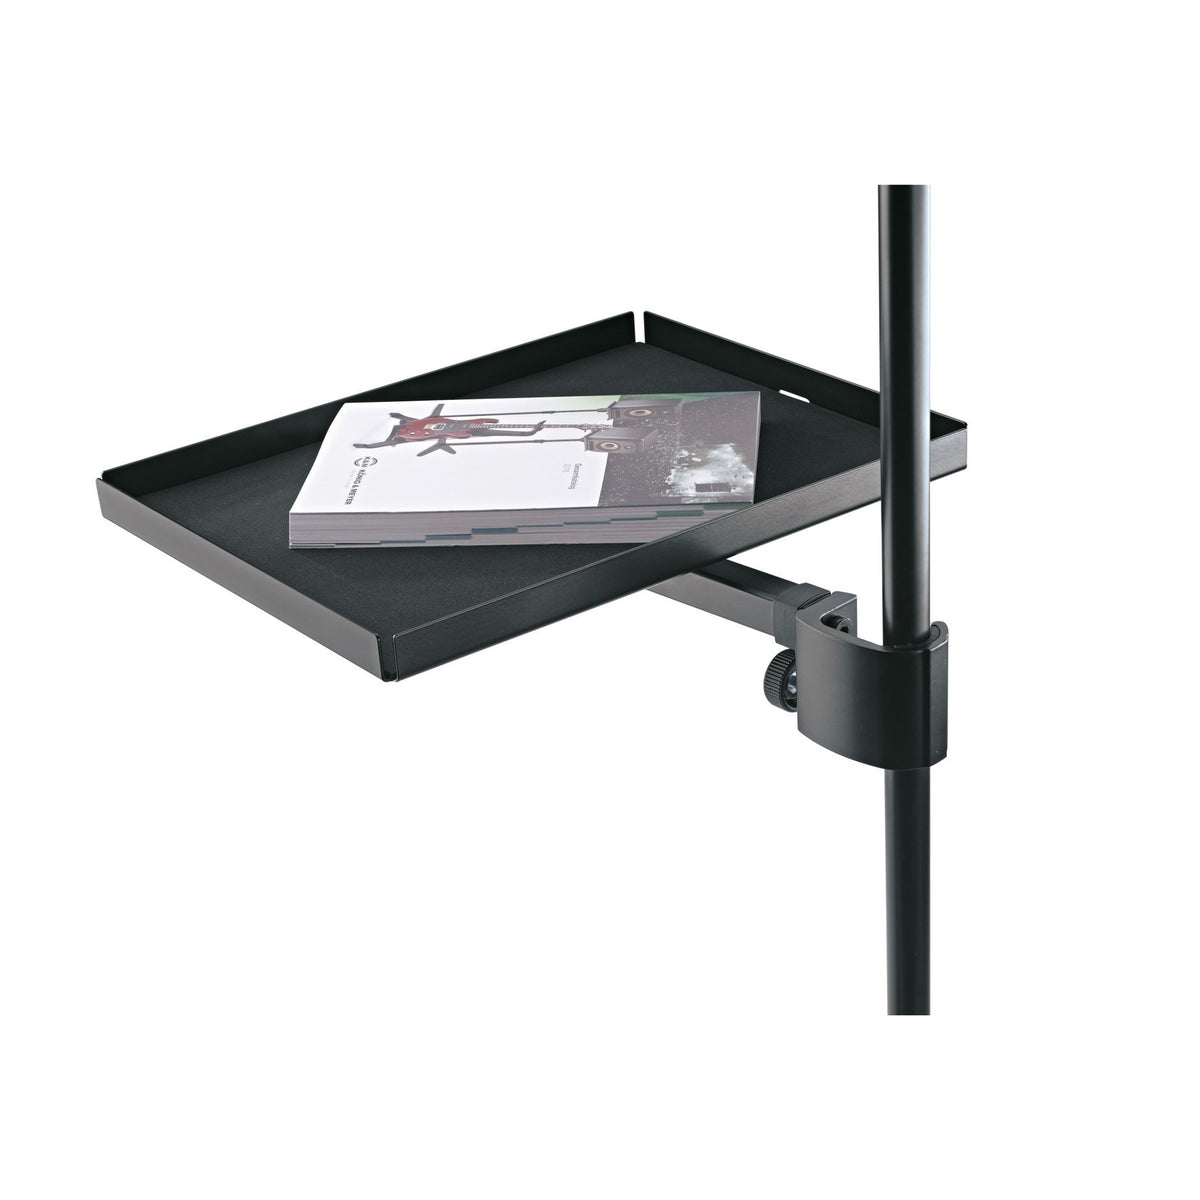 KÃ¶nig &amp; Meyer - 12225 Tray (Attachable to Stands)-Music Stand-KÃ¶nig &amp; Meyer-Music Elements